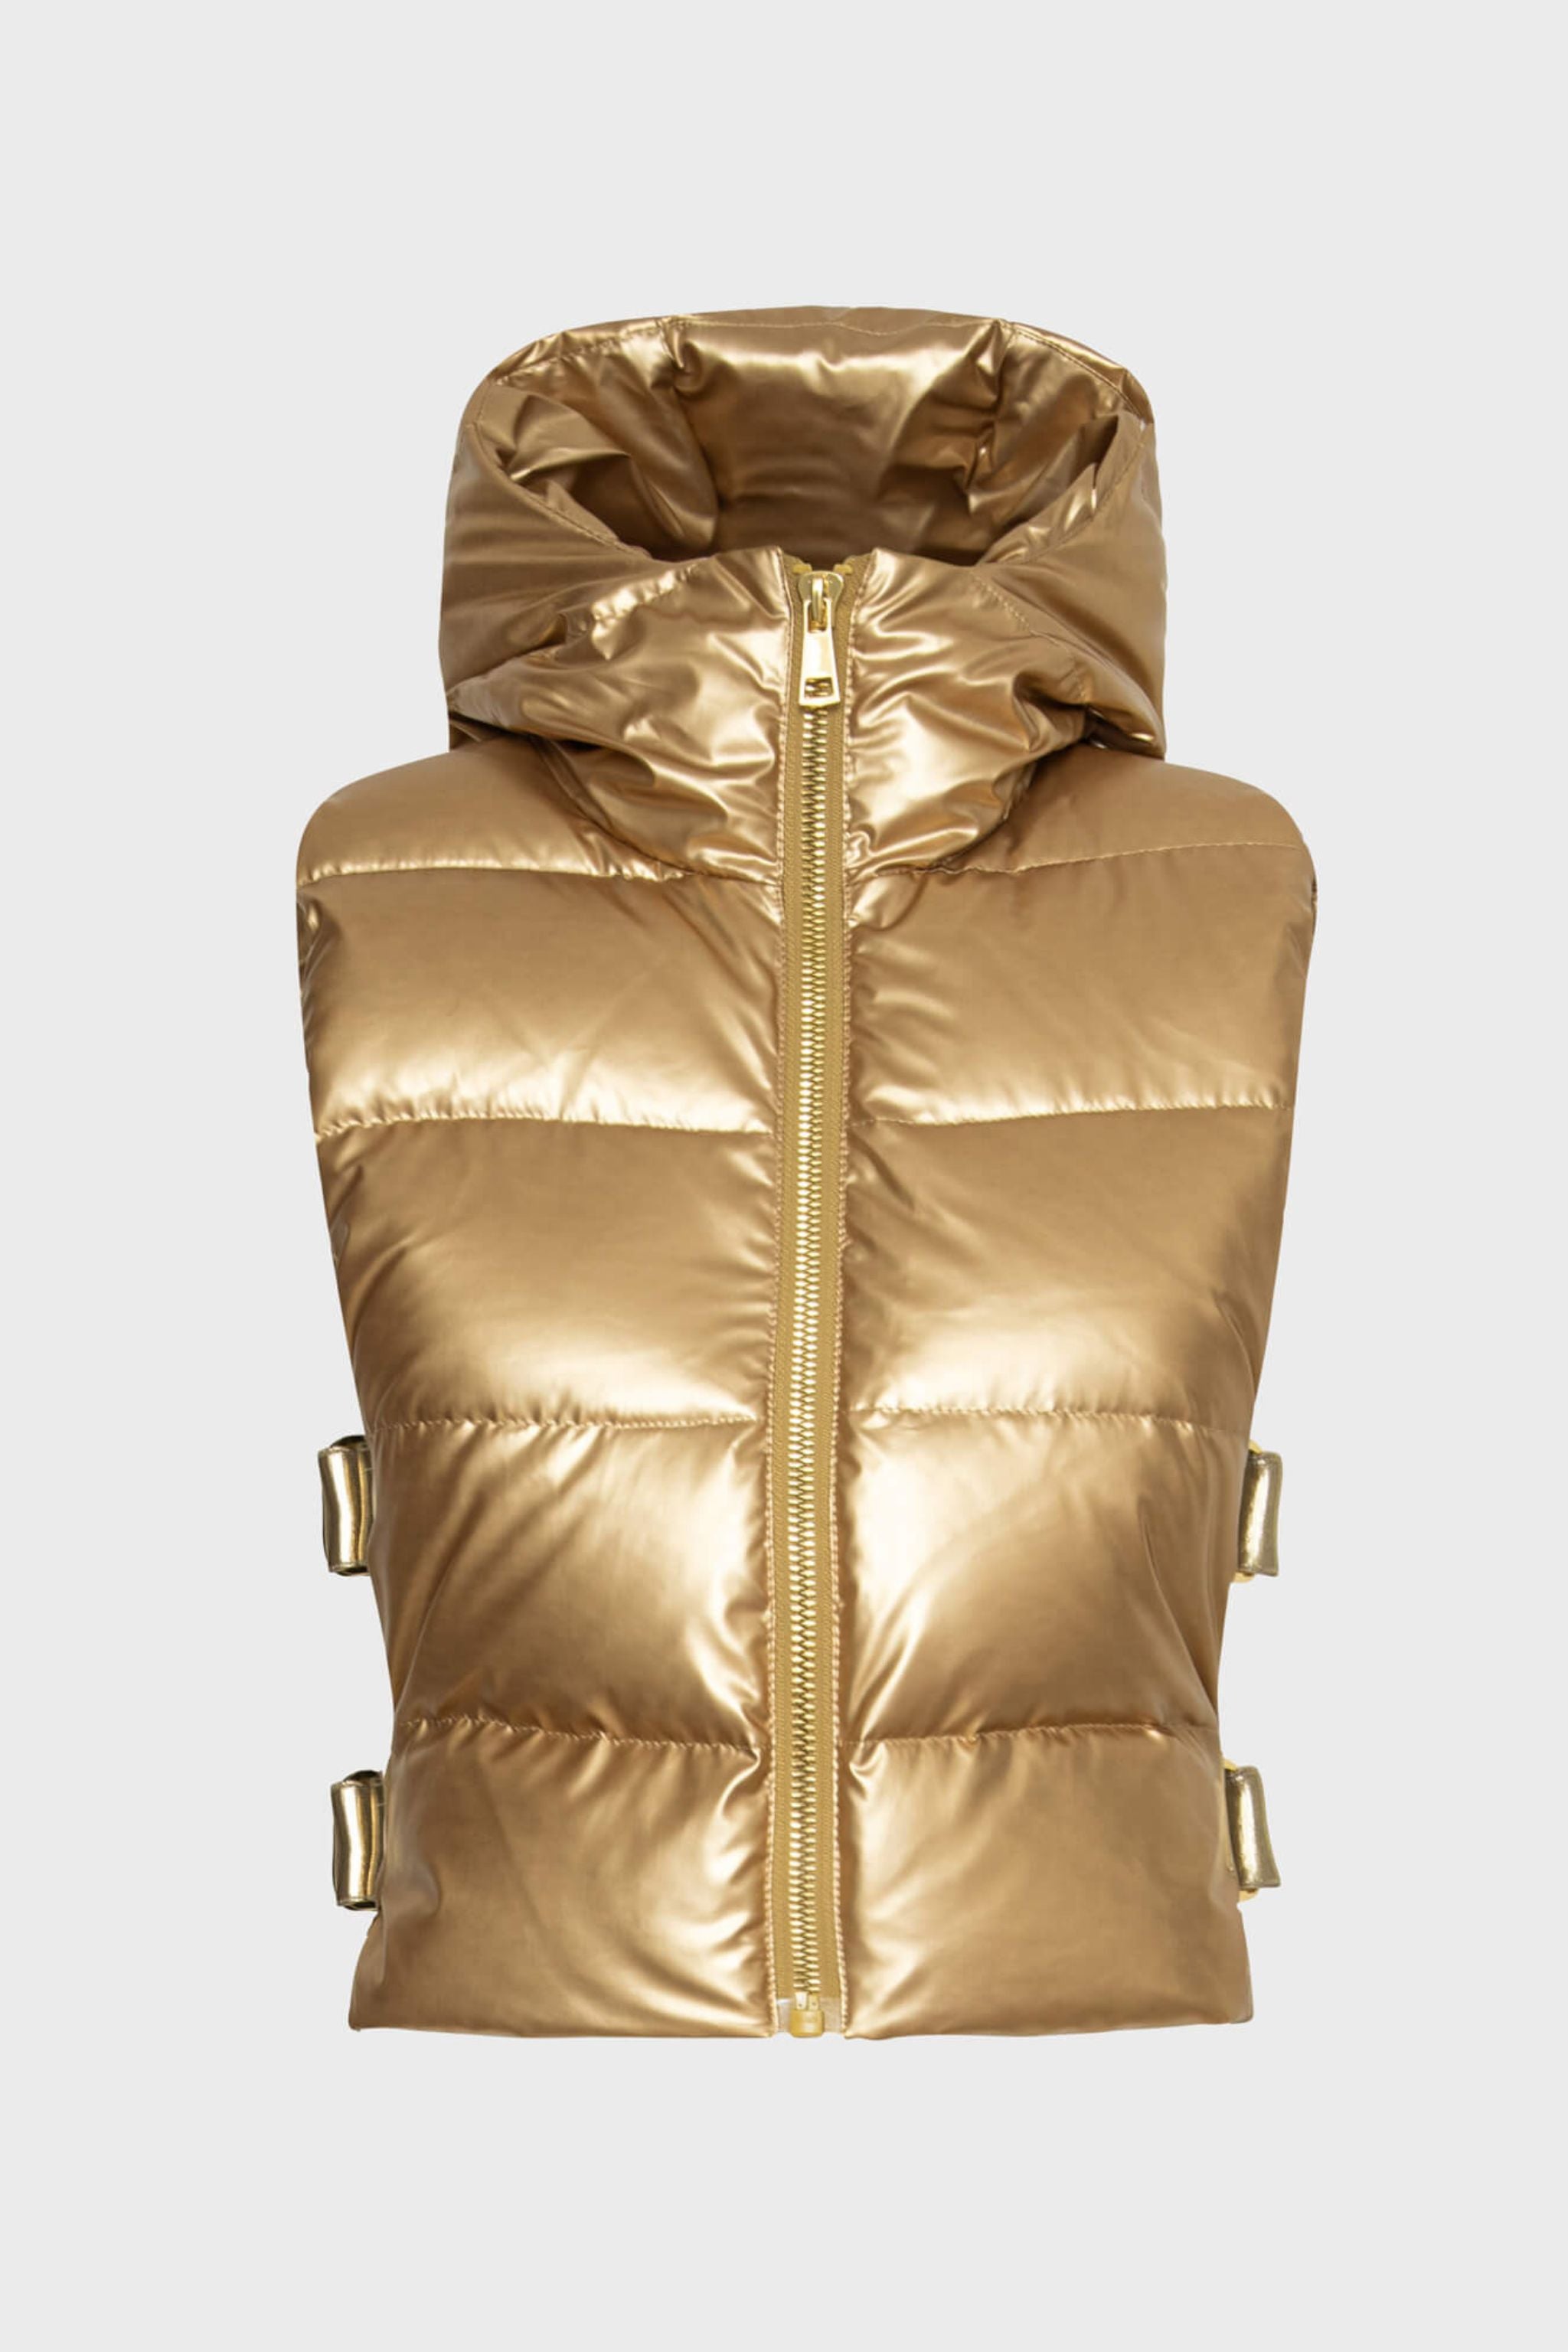 Lolie gold metallic quilted gilet w/ gold trim & side buckles